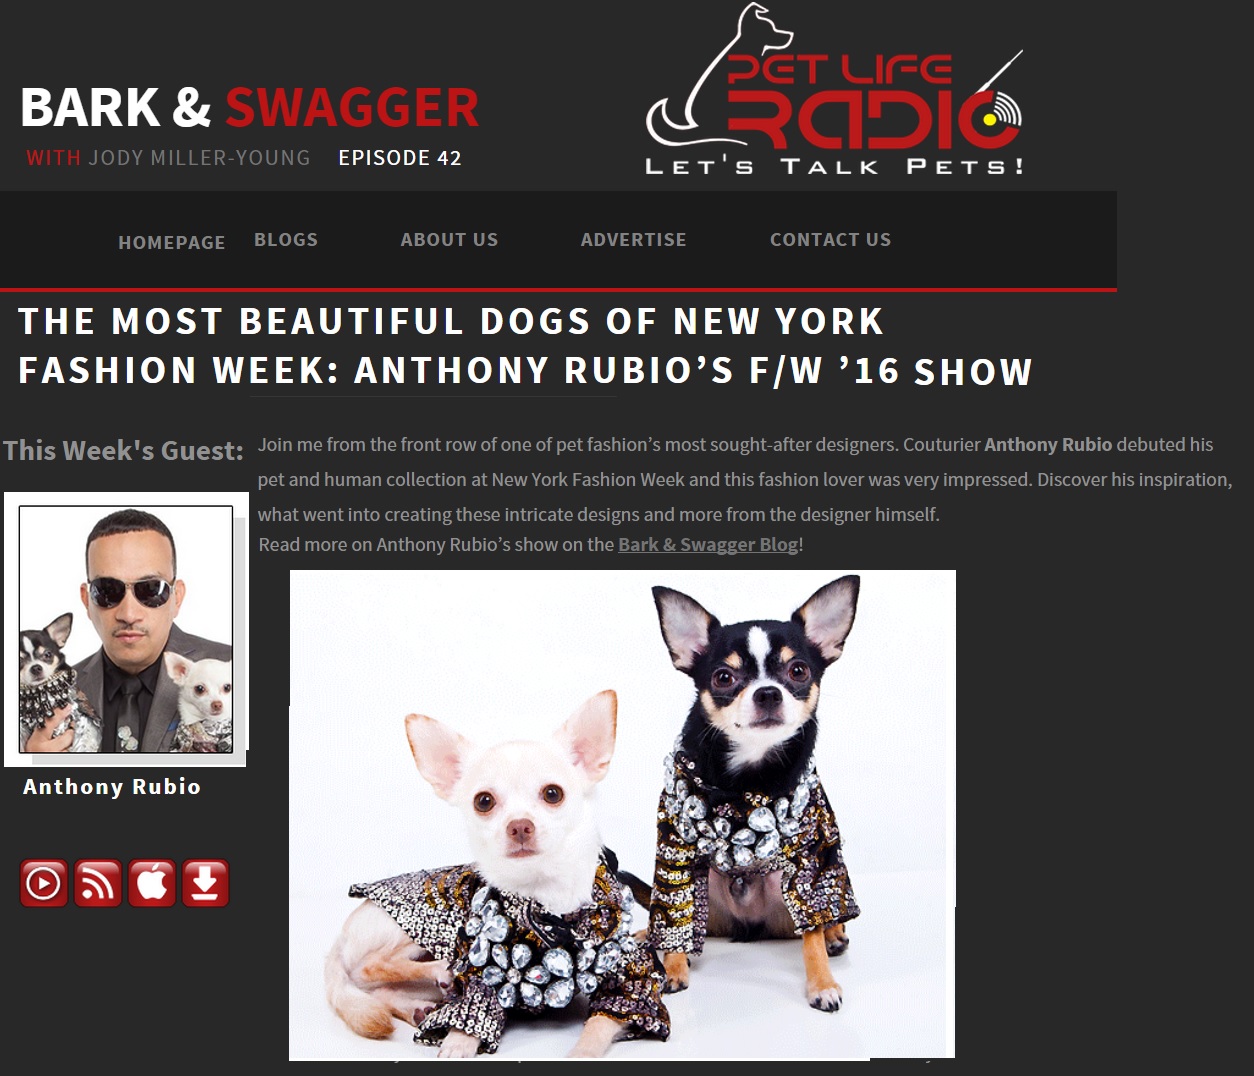 Anthony Rubio's interview on Bark & Swagger Pet Life Radio Show